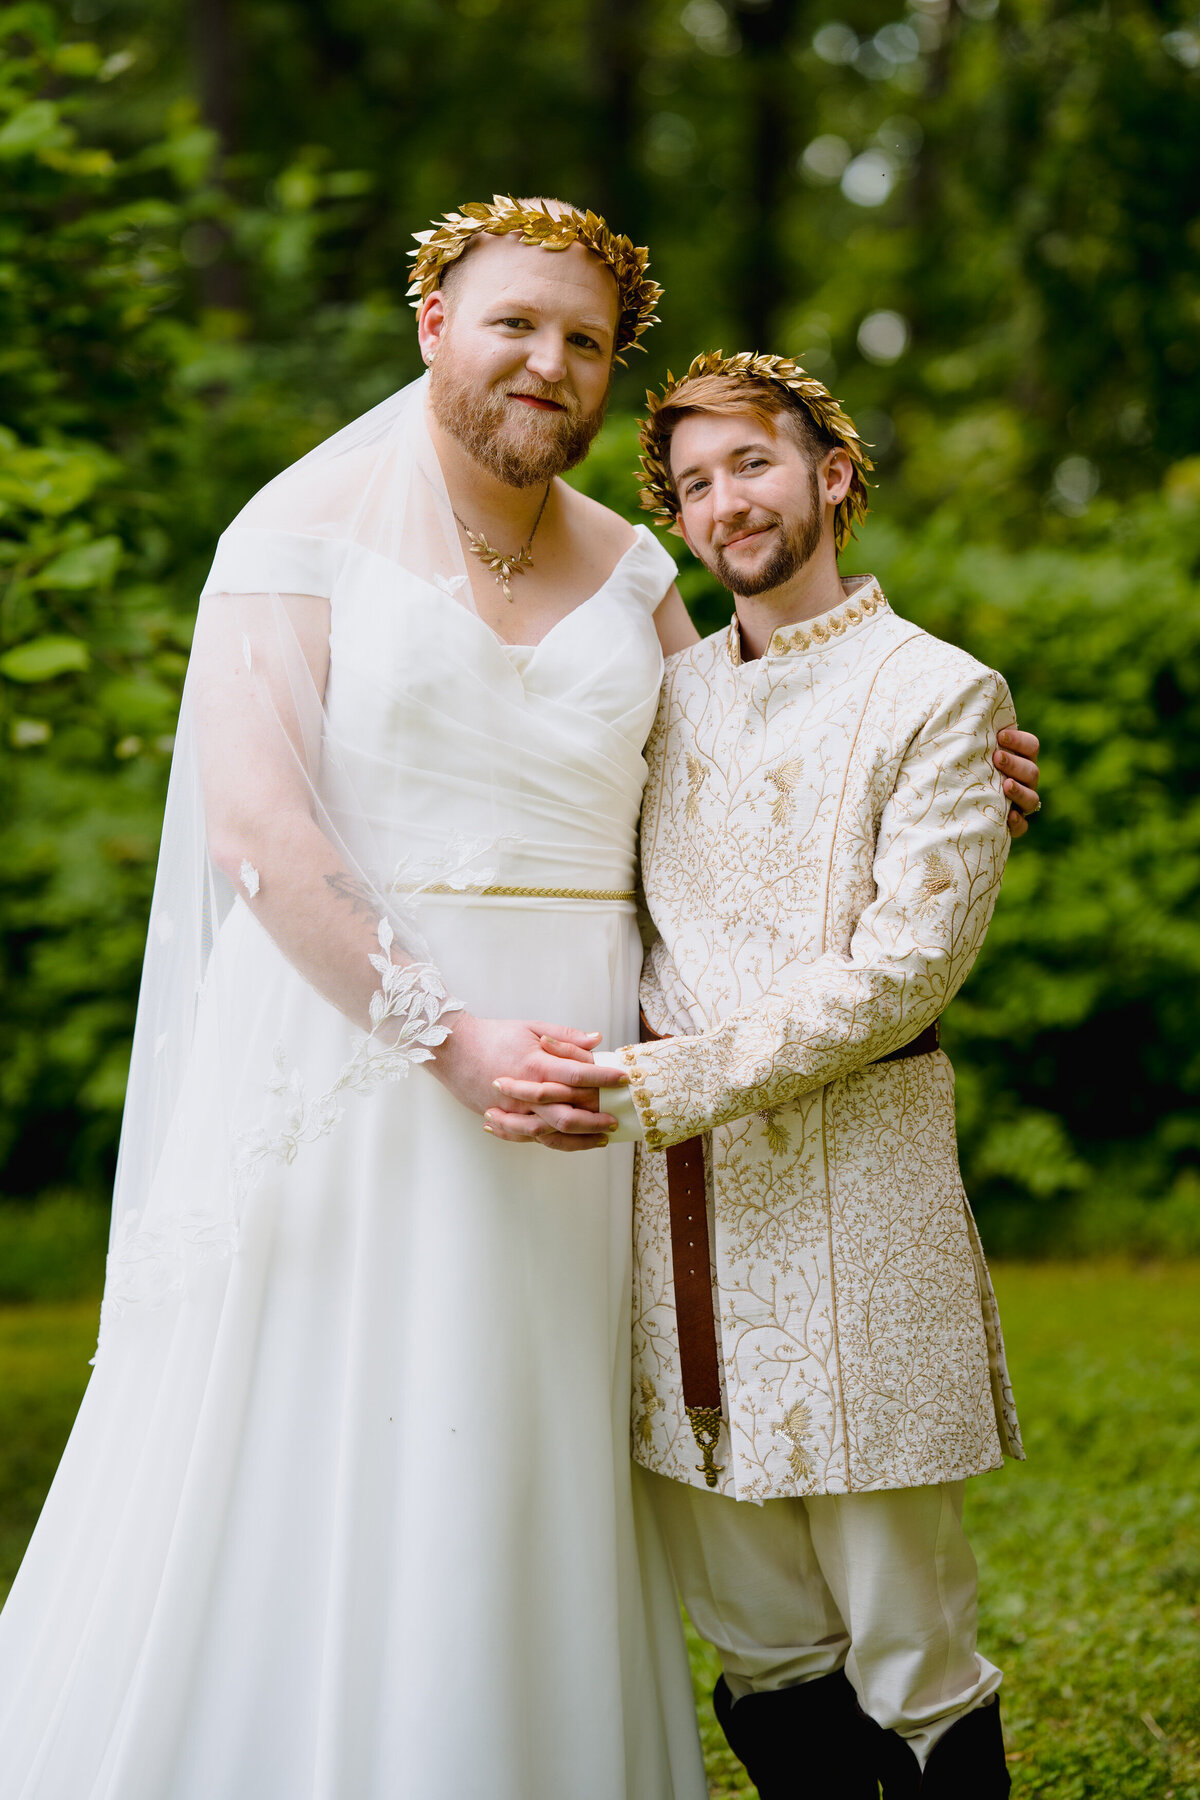 A wedding couple with one arm around each other and the other in front holding hands. They are smiling and standing in a small wooded area.